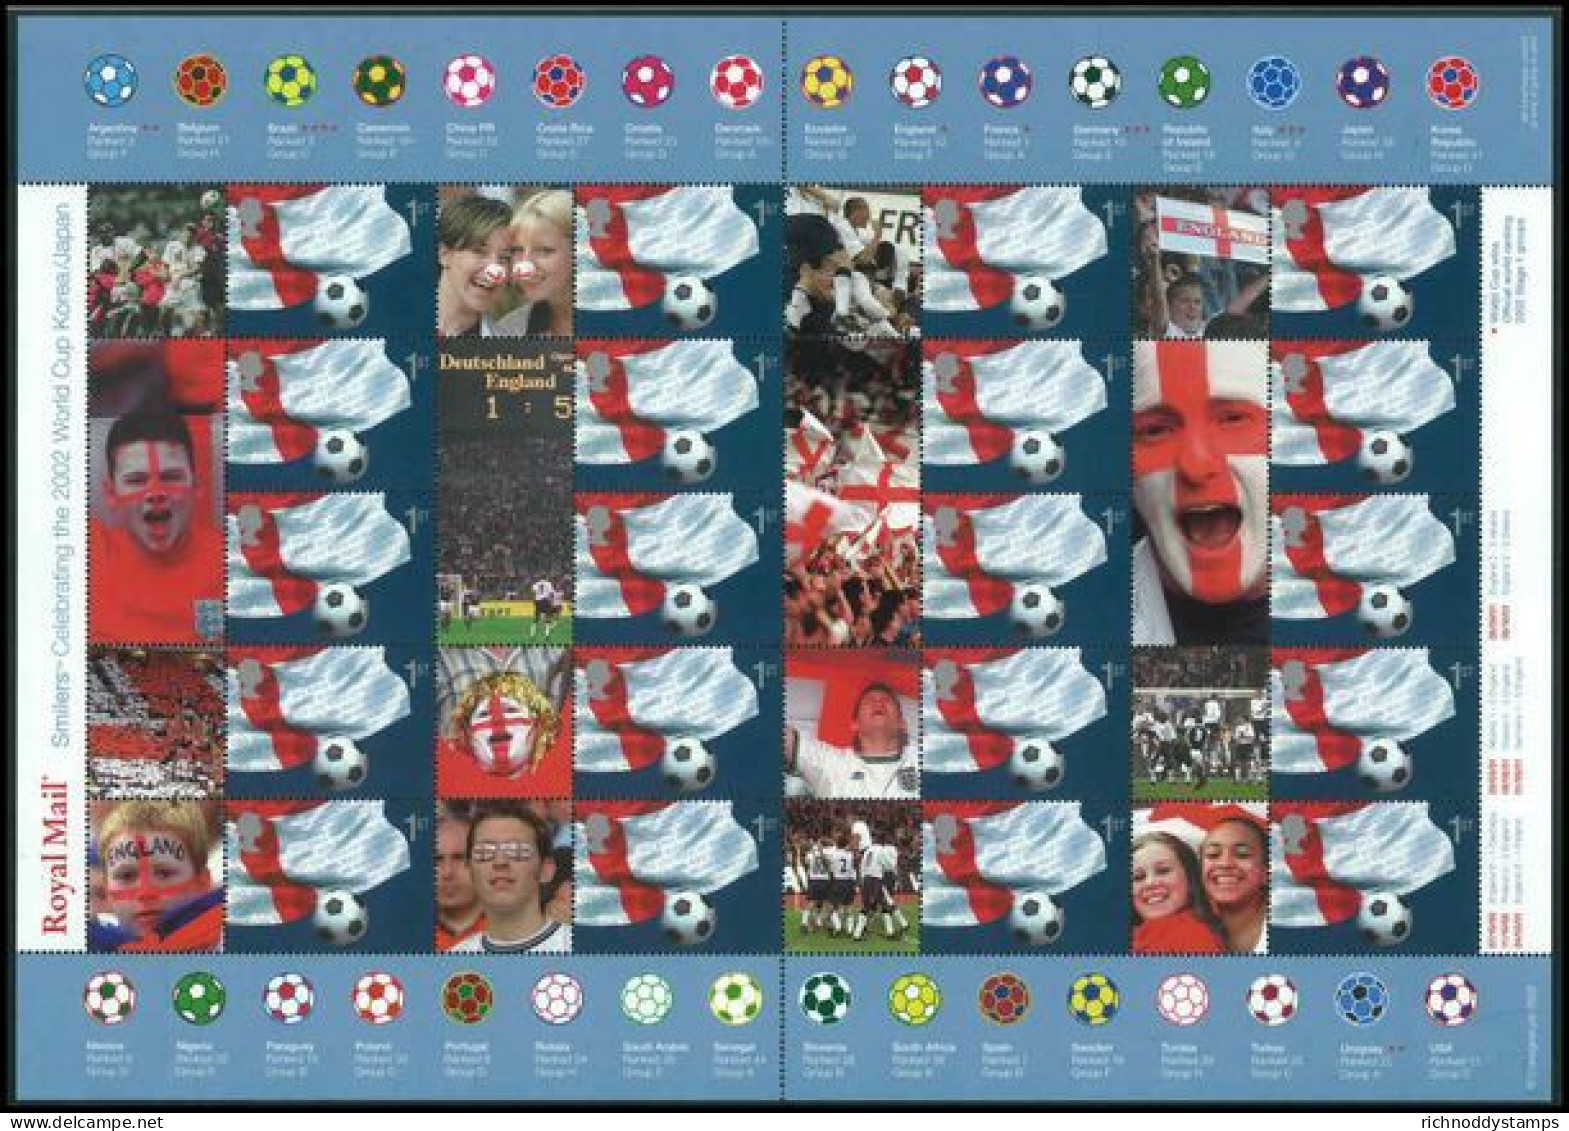 2002 Football World Cup Smilers Sheet Unmounted Mint. Imprinted Consignia Plc 2002unmounted Mint - Timbres Personnalisés